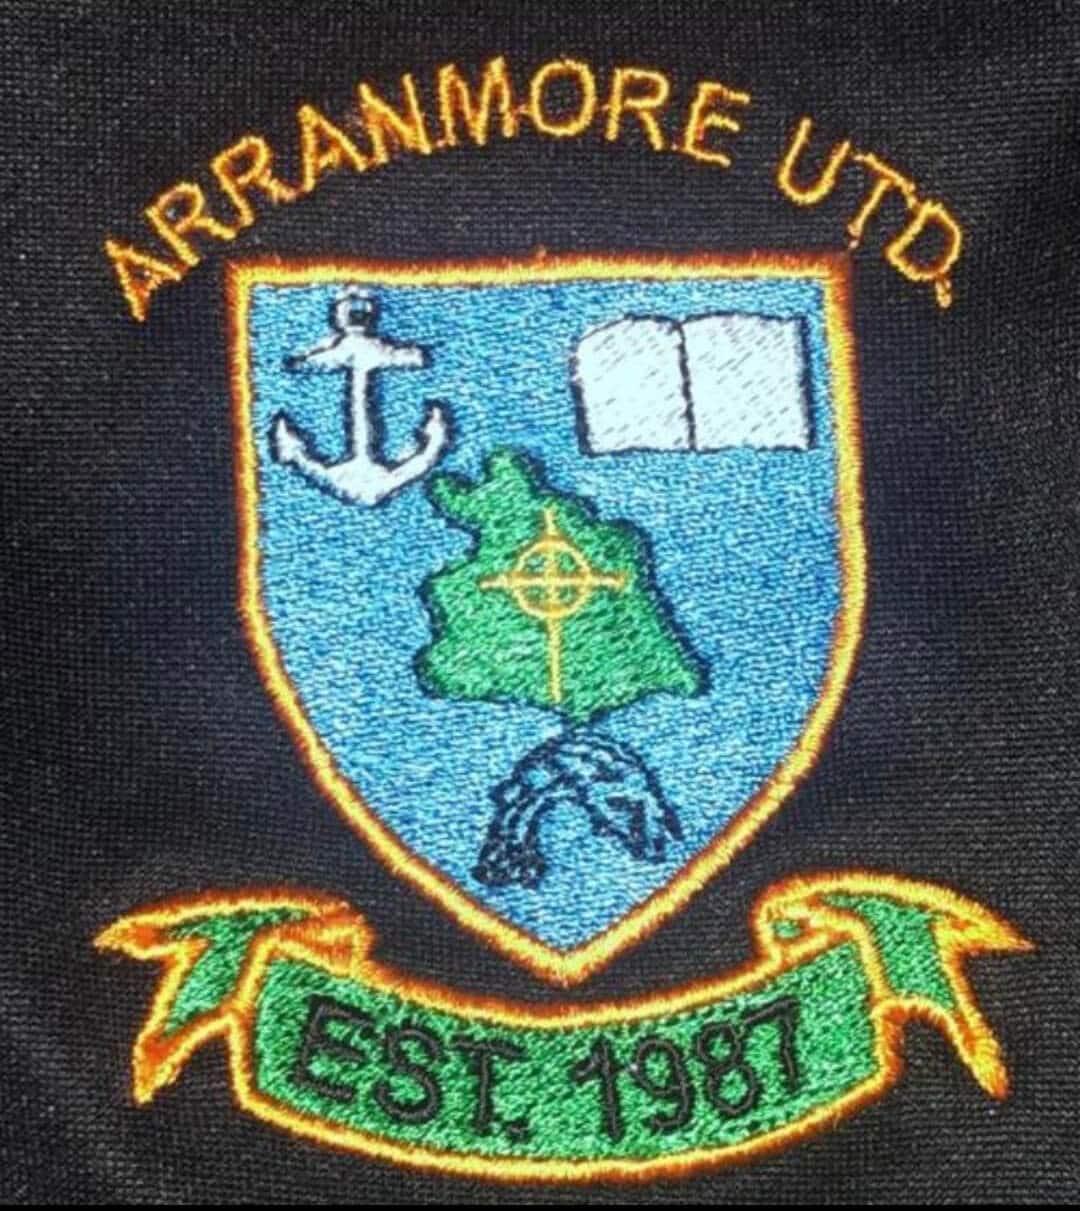 The Old Arranmore United Logo